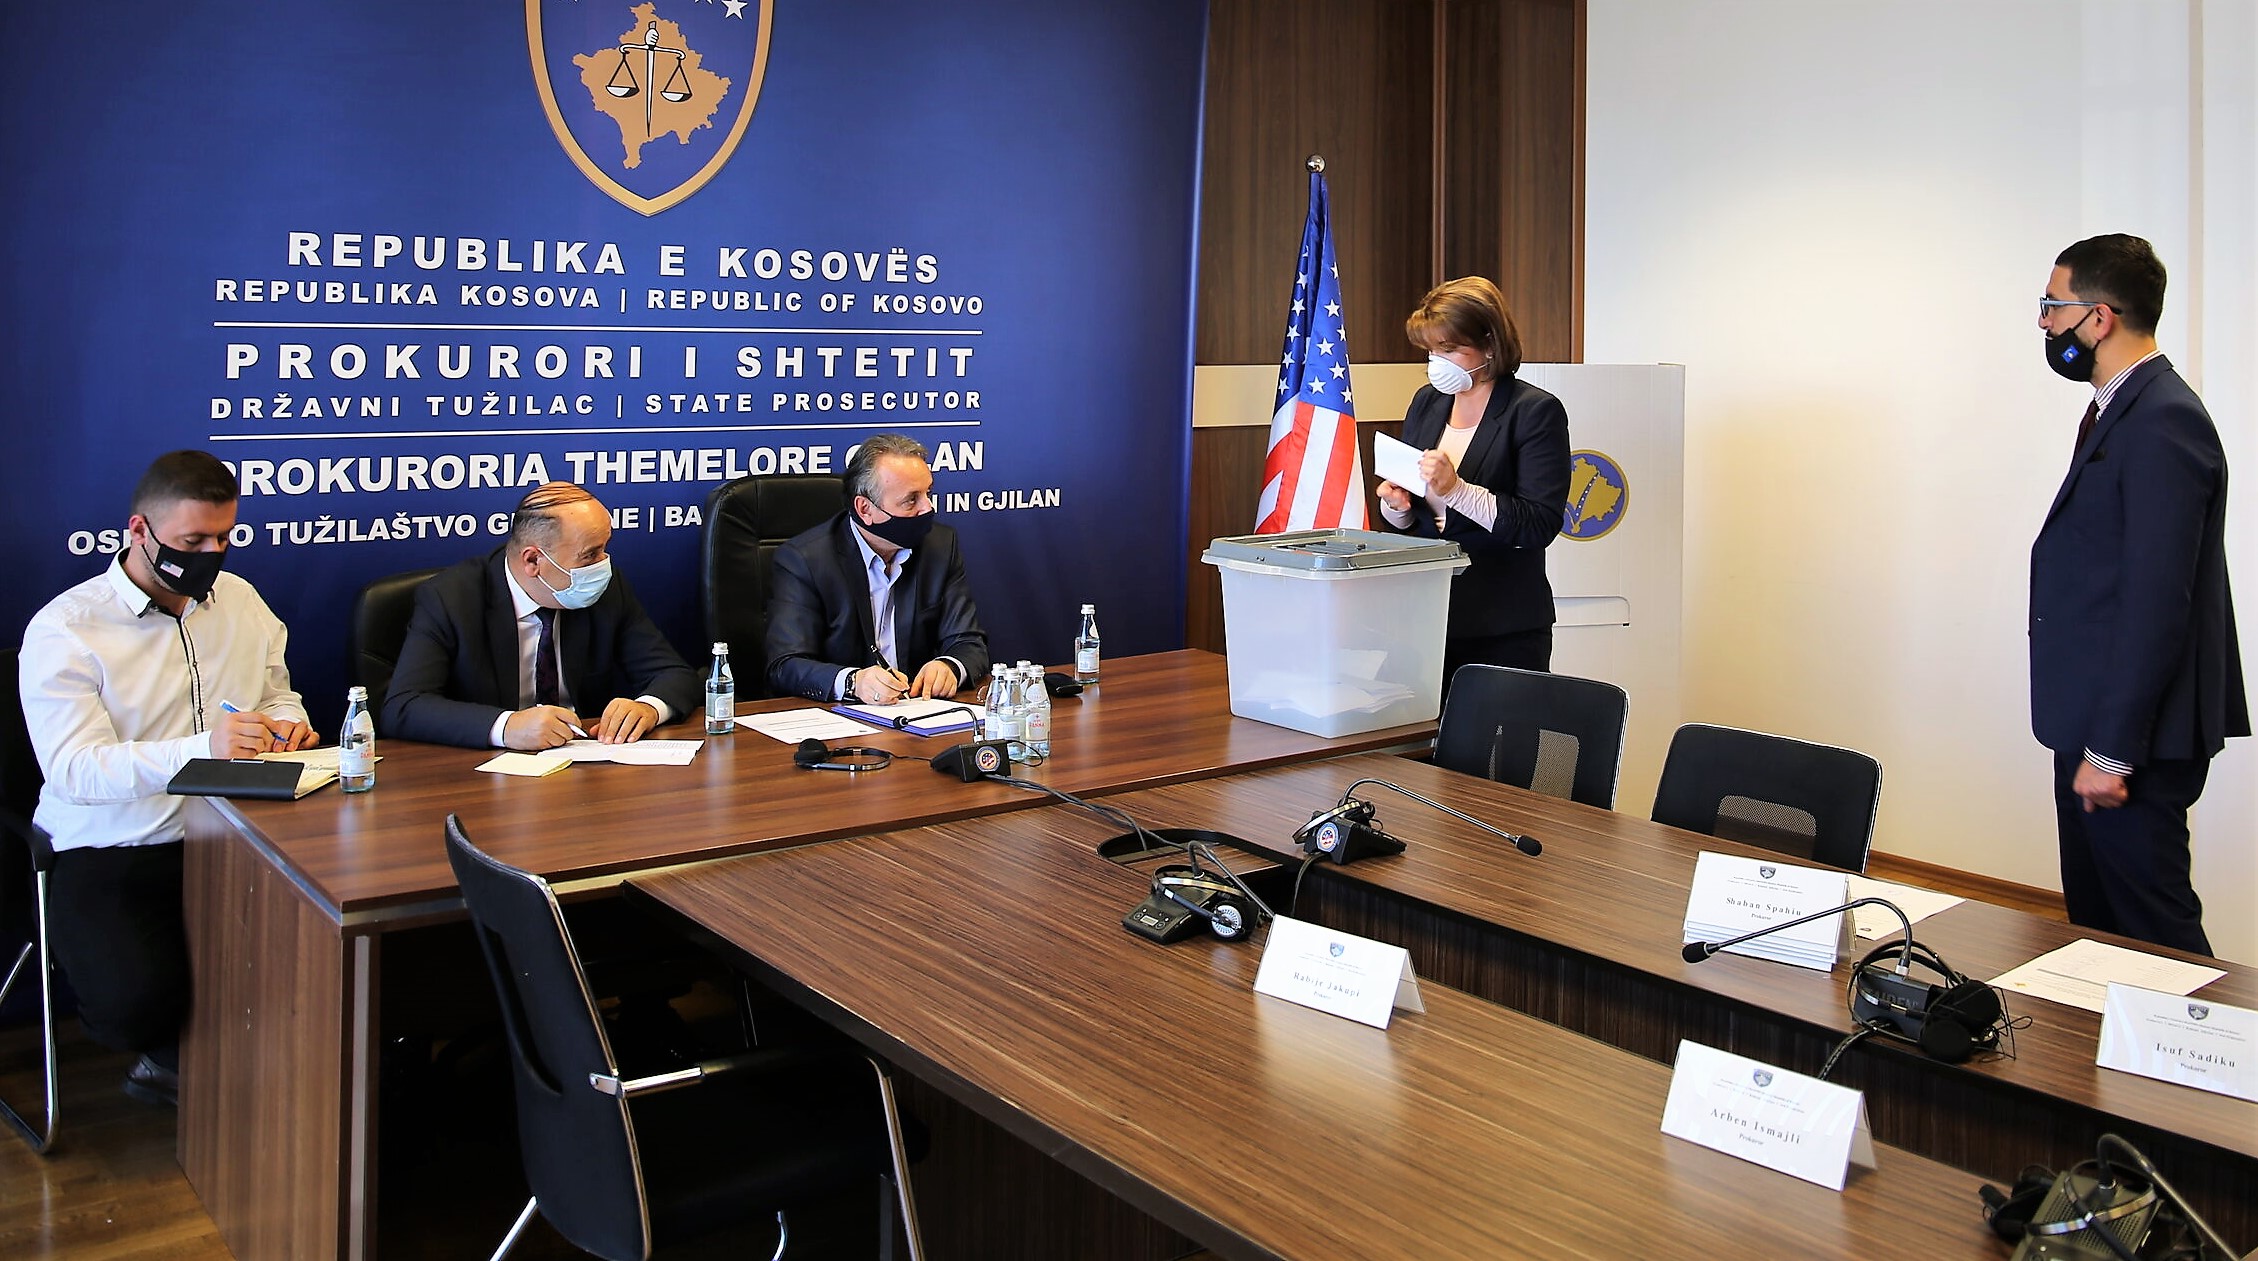 Voting process for the election of KPC members from the ranks of the Basic Prosecution of Prishtina, Ferizaj and Gjilan takes place